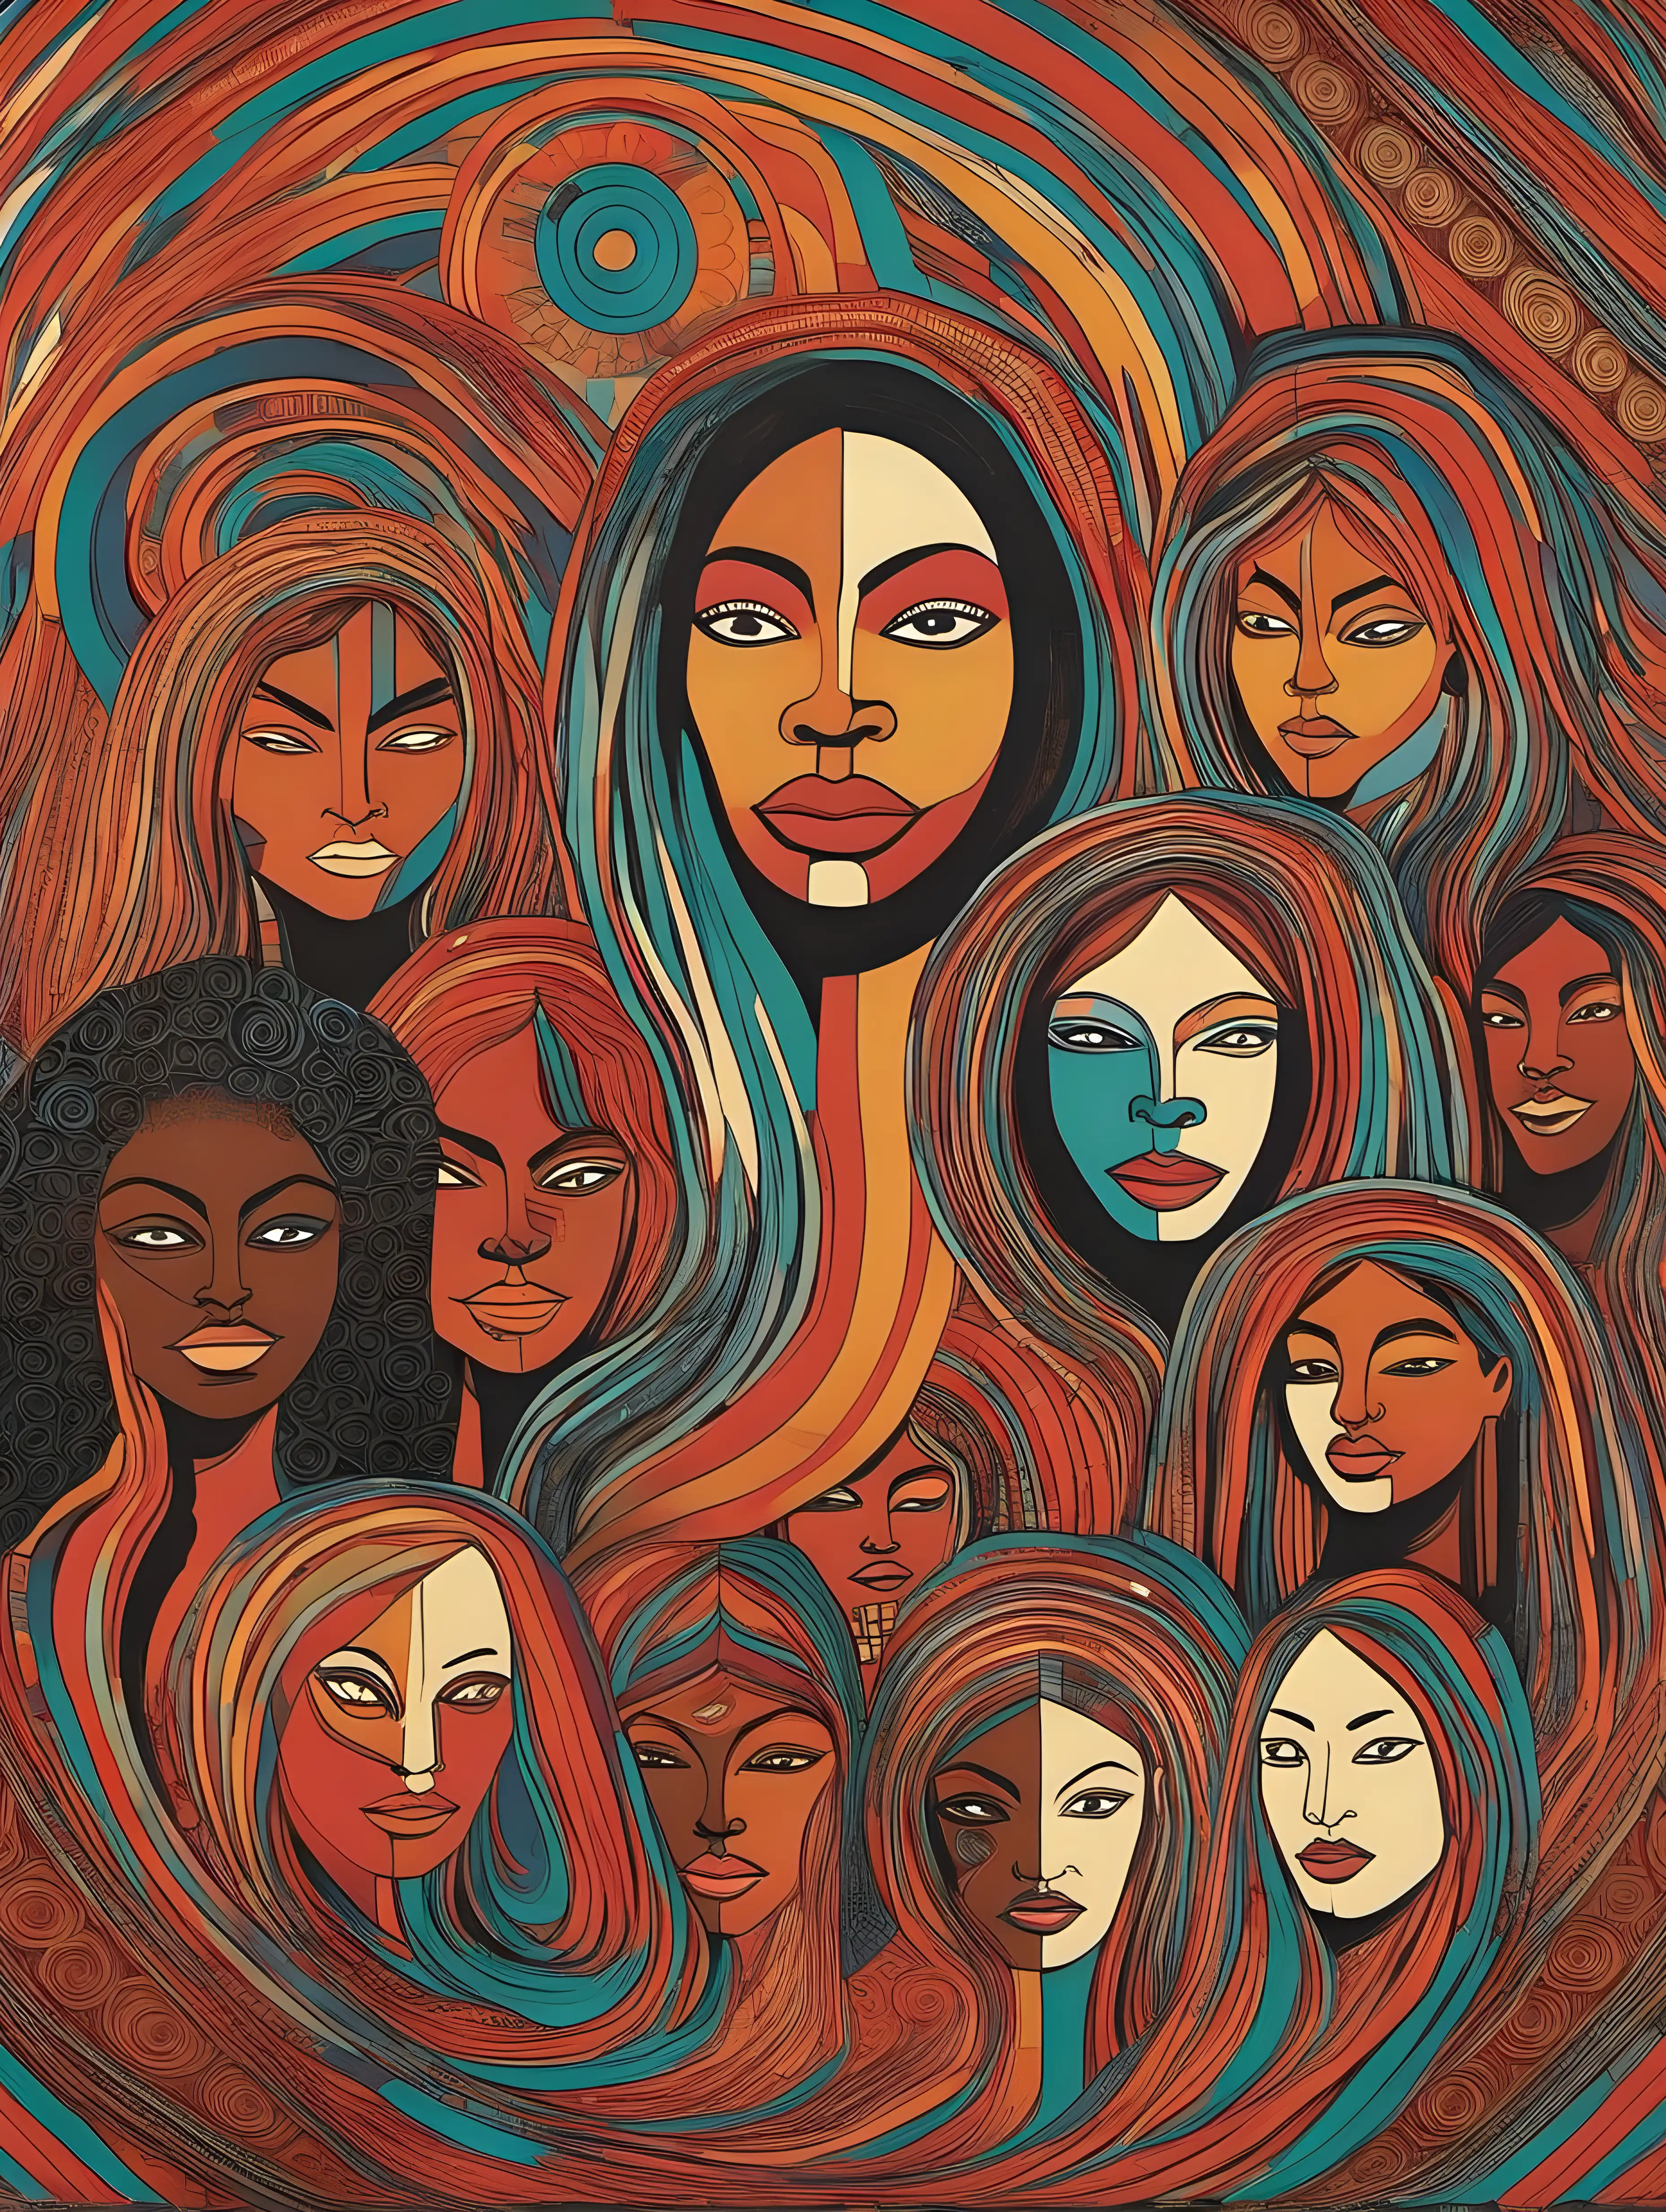 Empowering Women in Diverse Unity